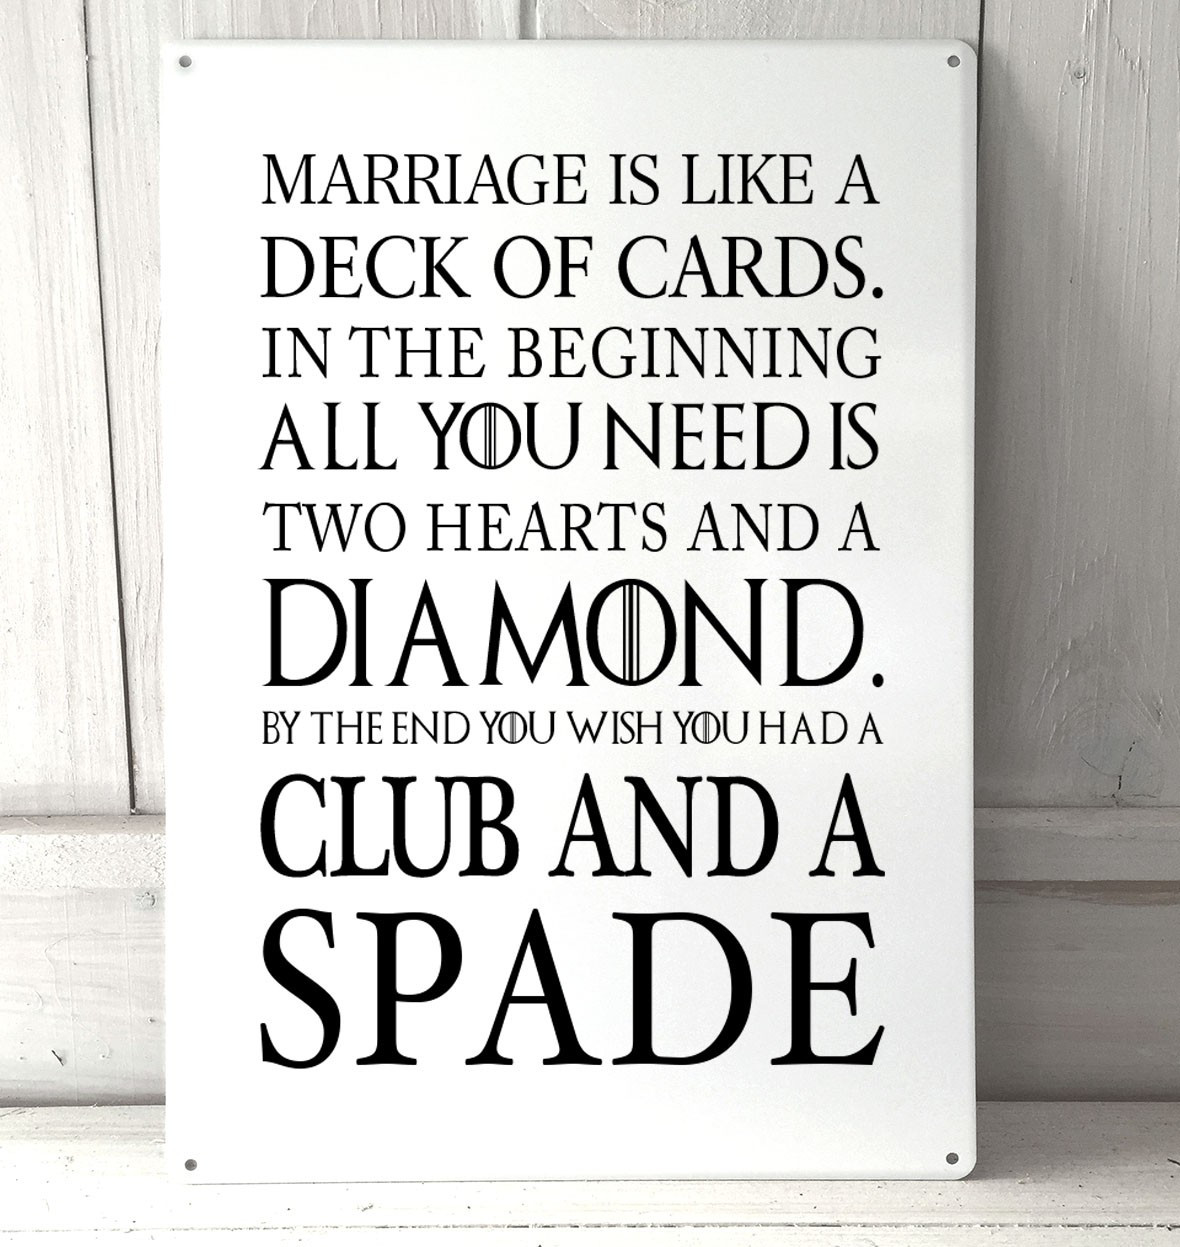 Funny Wedding Quotes For A Card
 Marriage is like a deck of cards funny quote metal sign